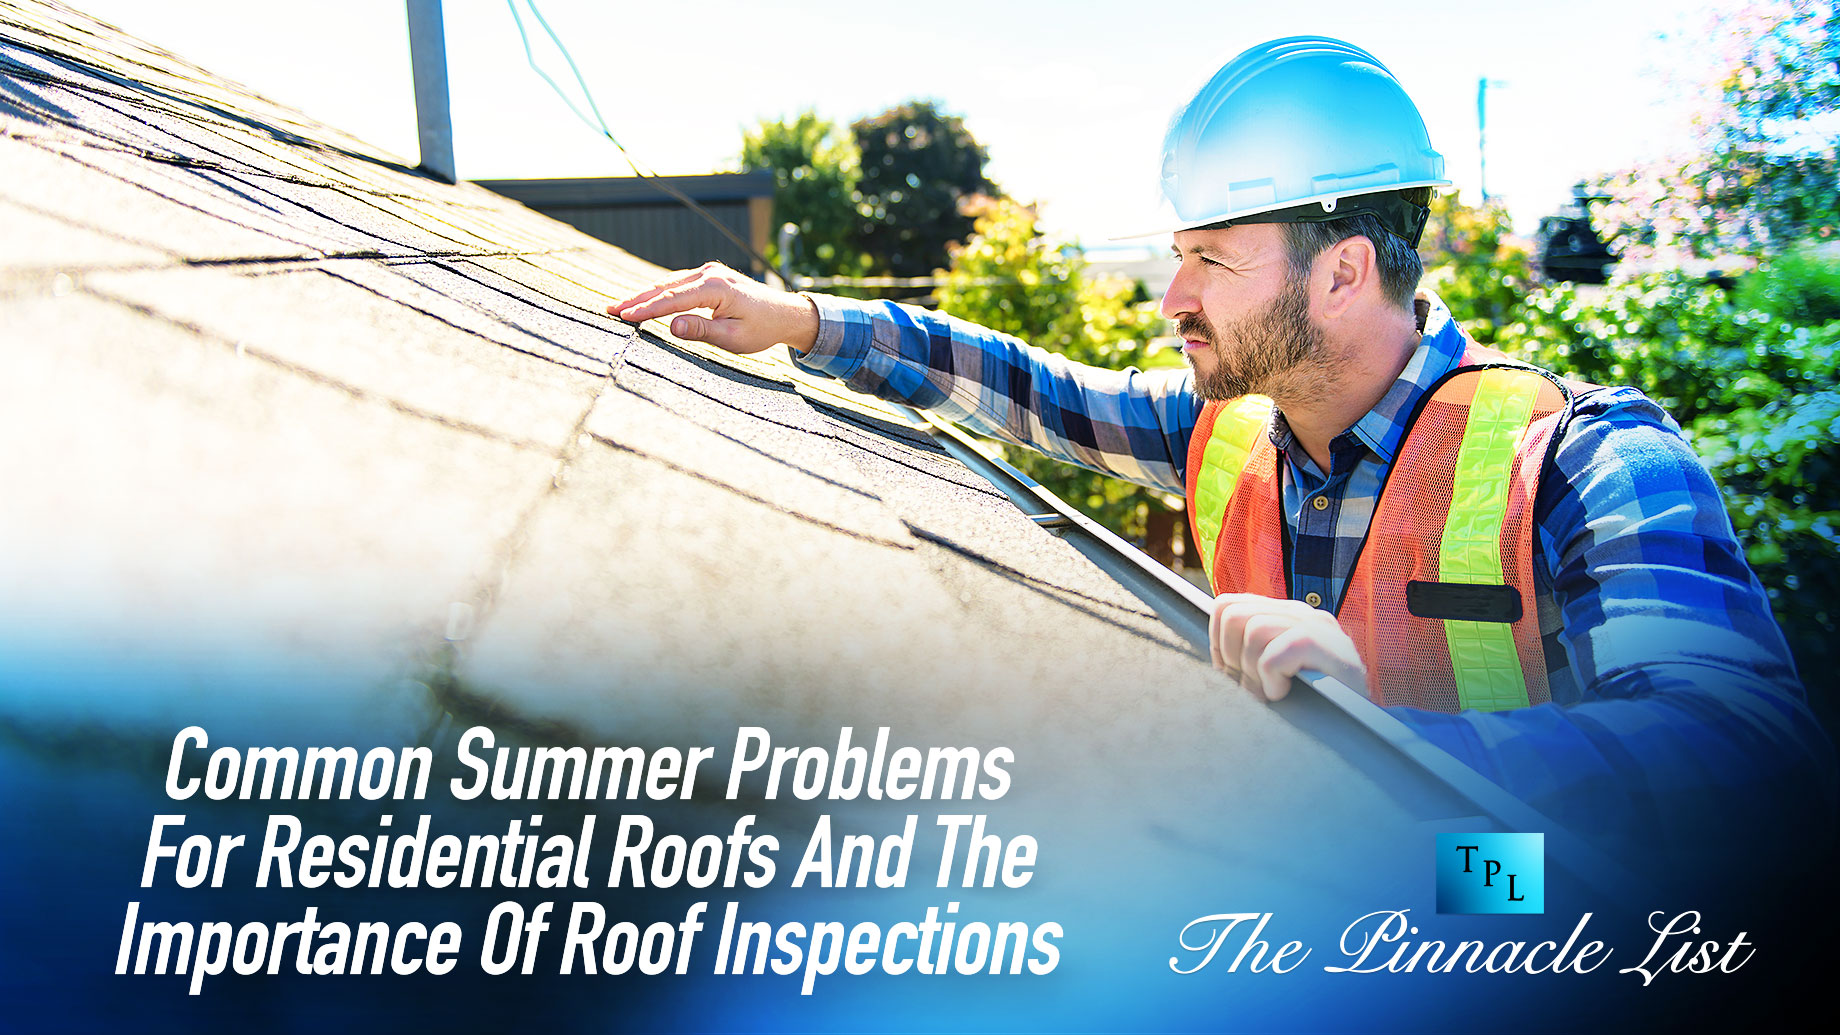 Beating The Heat: Common Summer Problems For Residential Roofs And The Importance Of Roof Inspections